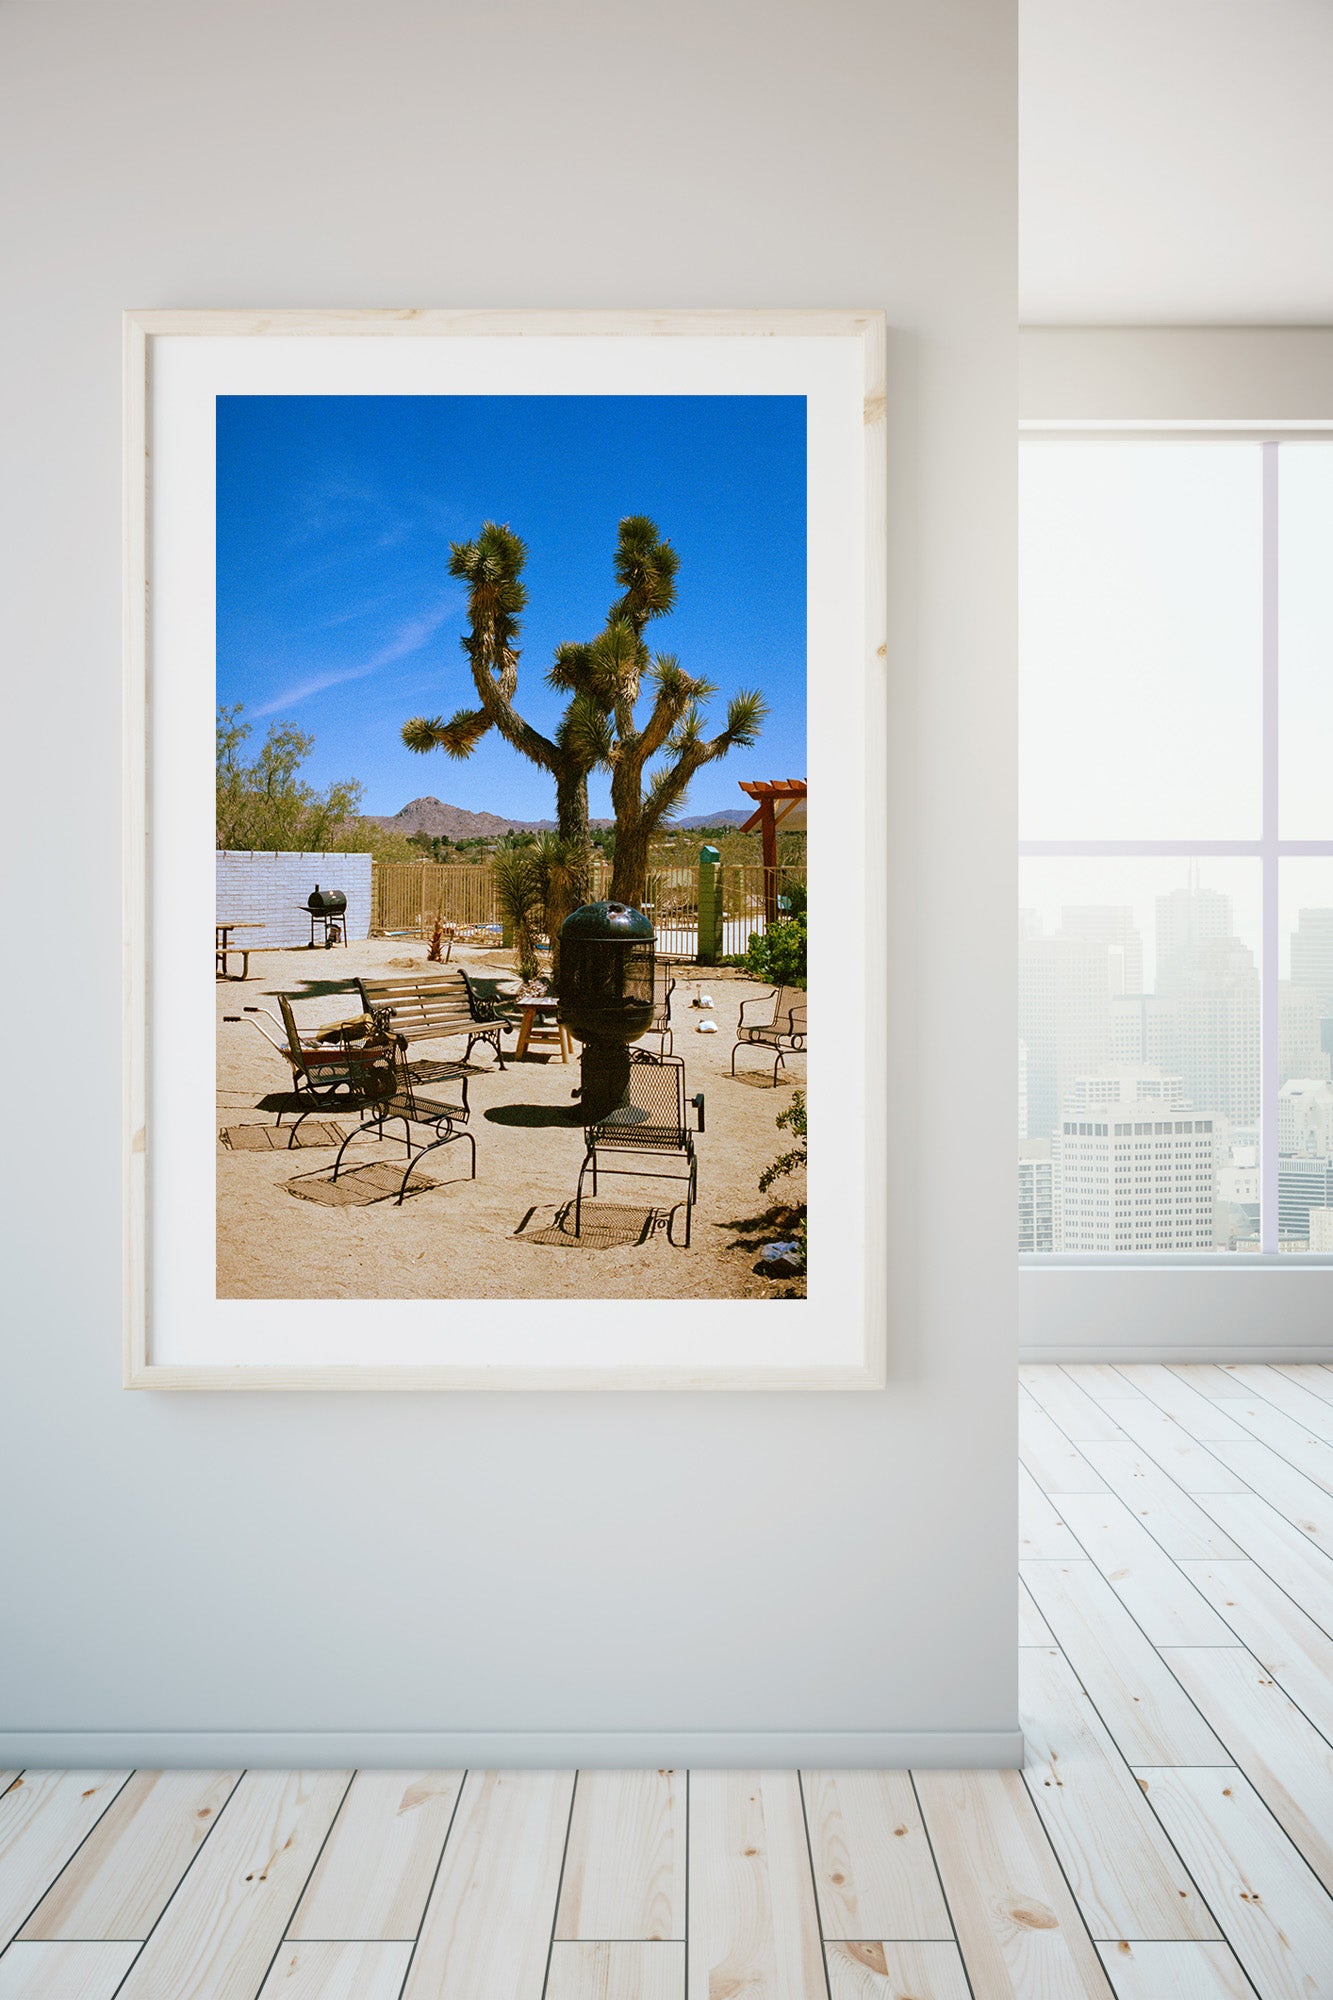 A room with a picture. A photographic print of the joshua treem motel california, swimimg pool at joshua tree's Artwork, Prints wall art California Photographic prints Ocean Palm Springs Framed artwork, Photography,  Film photography, Vintage photo style,  Interior design, beach, Buy Art, photography art, Joshua tree print, Joshua tree, buy art, Prints for sale, art prints, color photography, 